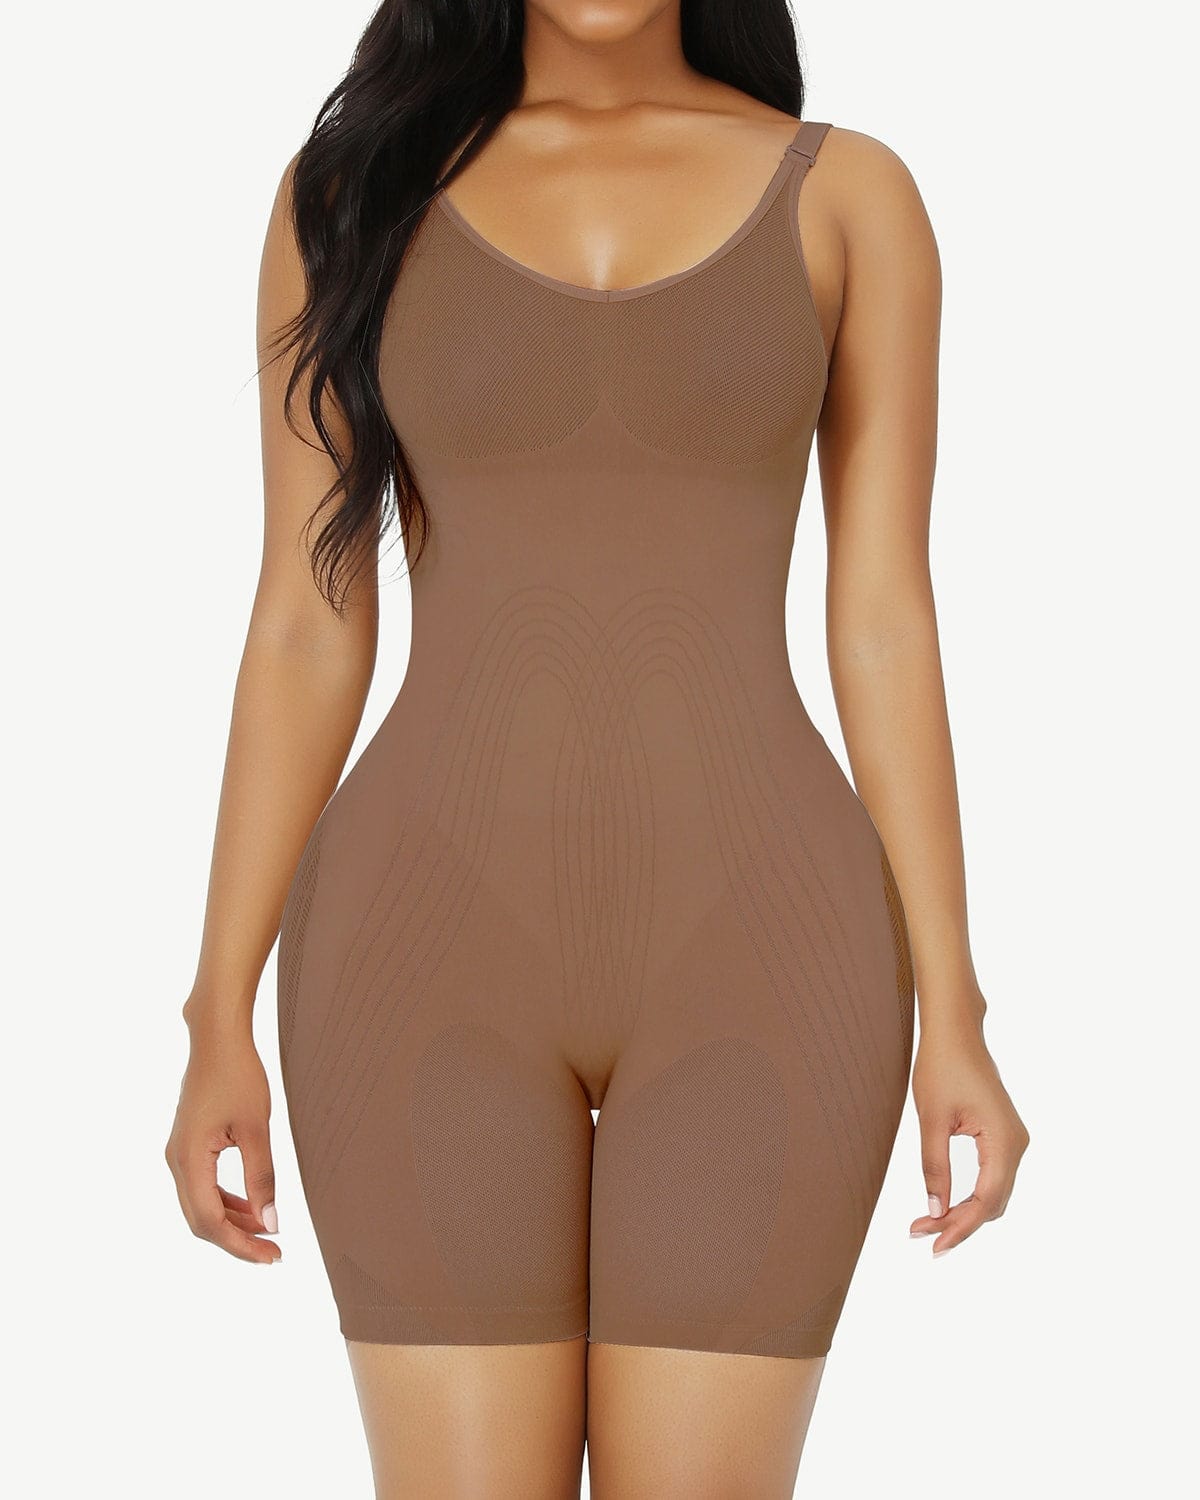 Express Bodycon High Compression High Neck Strappy Back Bodysuit